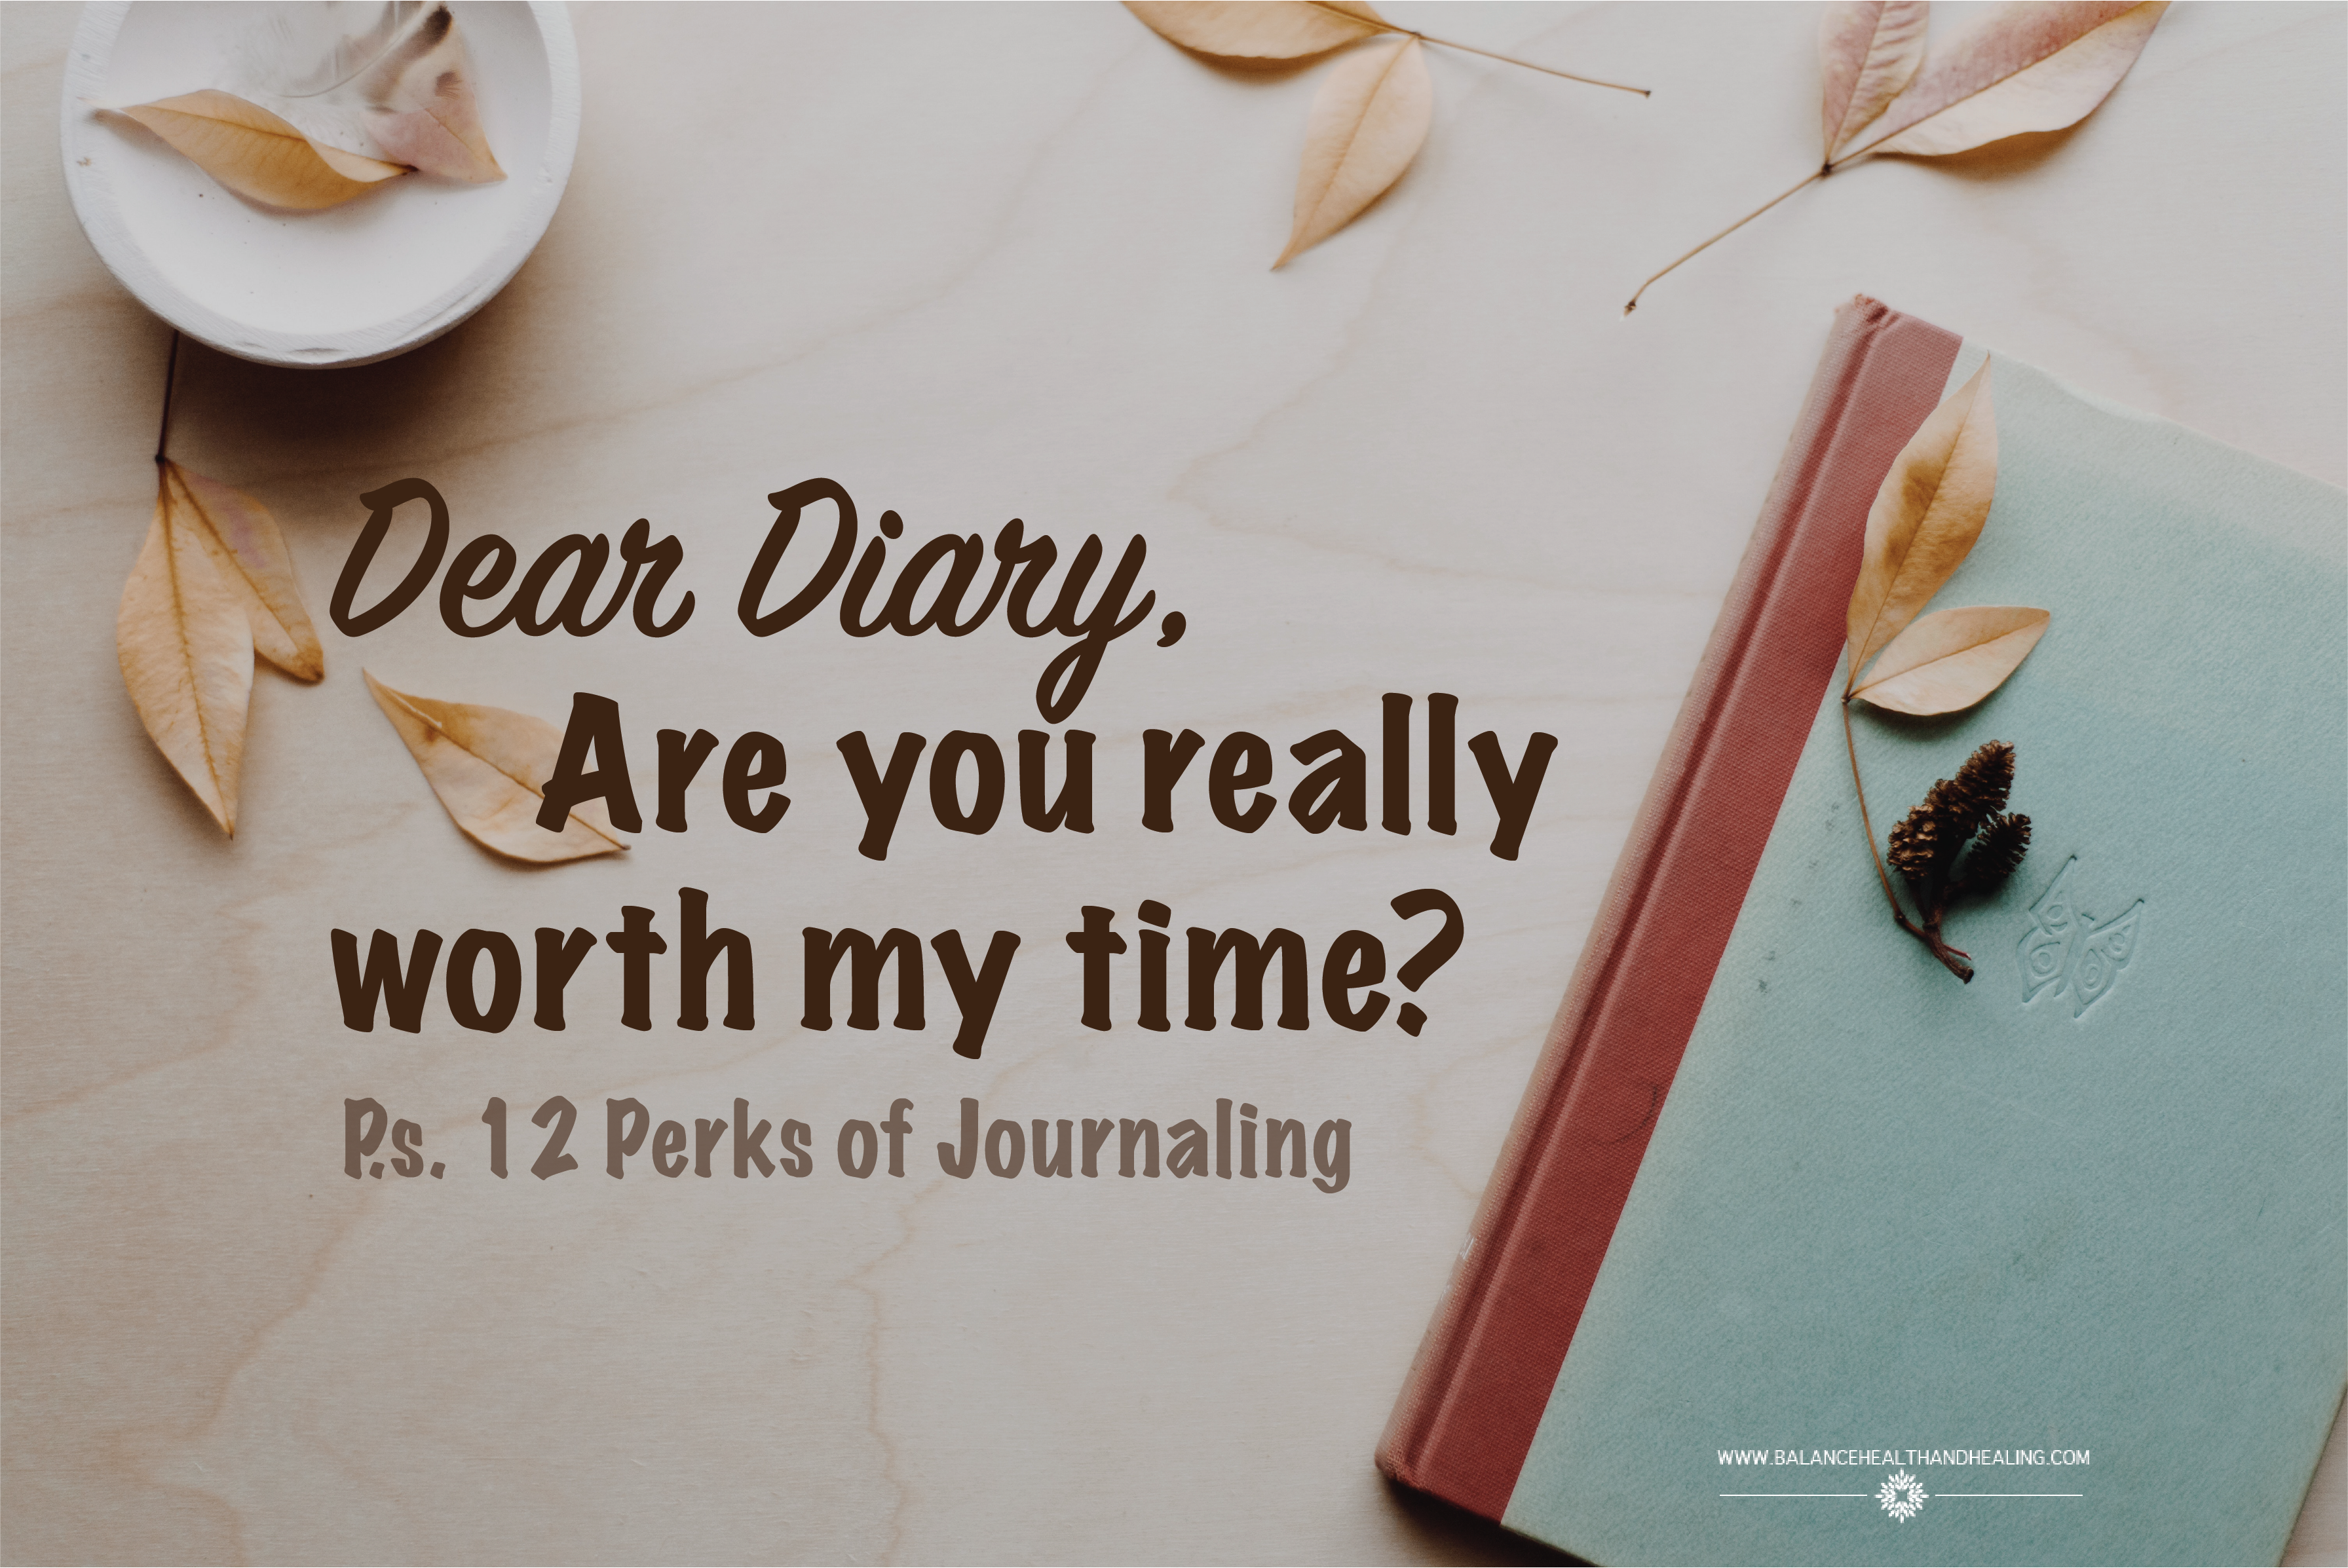 Dear Diary, Are you really worth my time?